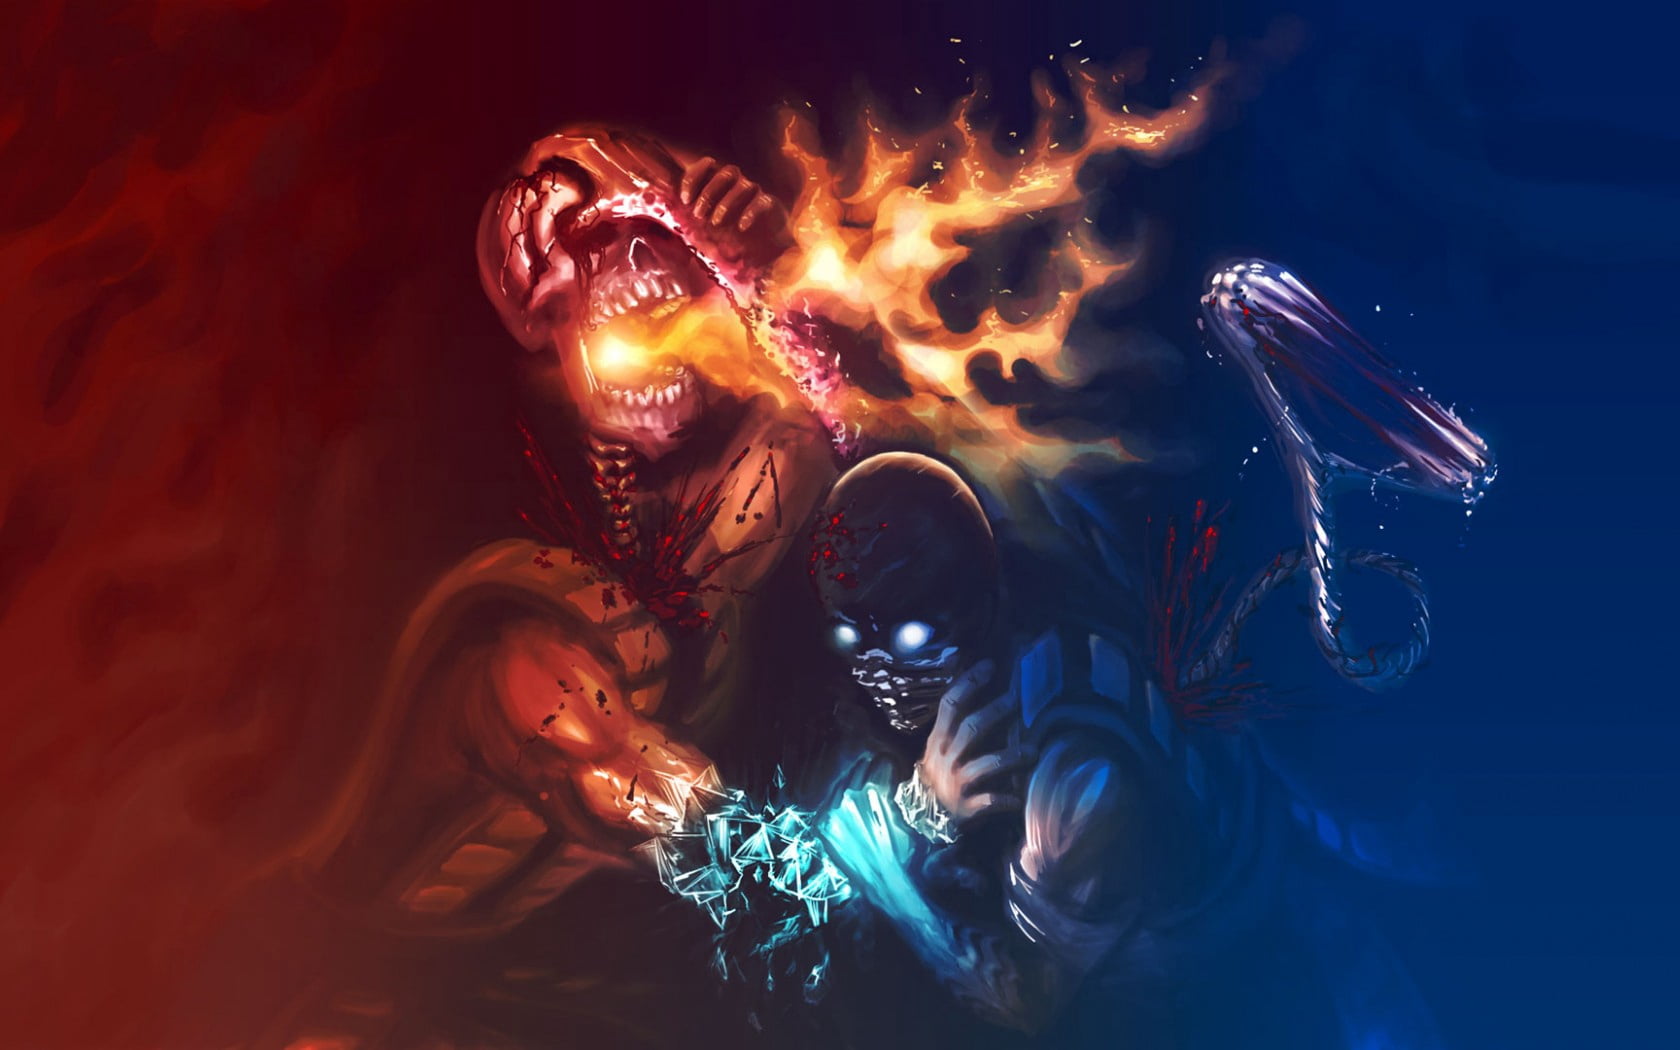 two fire and ice characters wallpaper, mortal kombat, scorpion